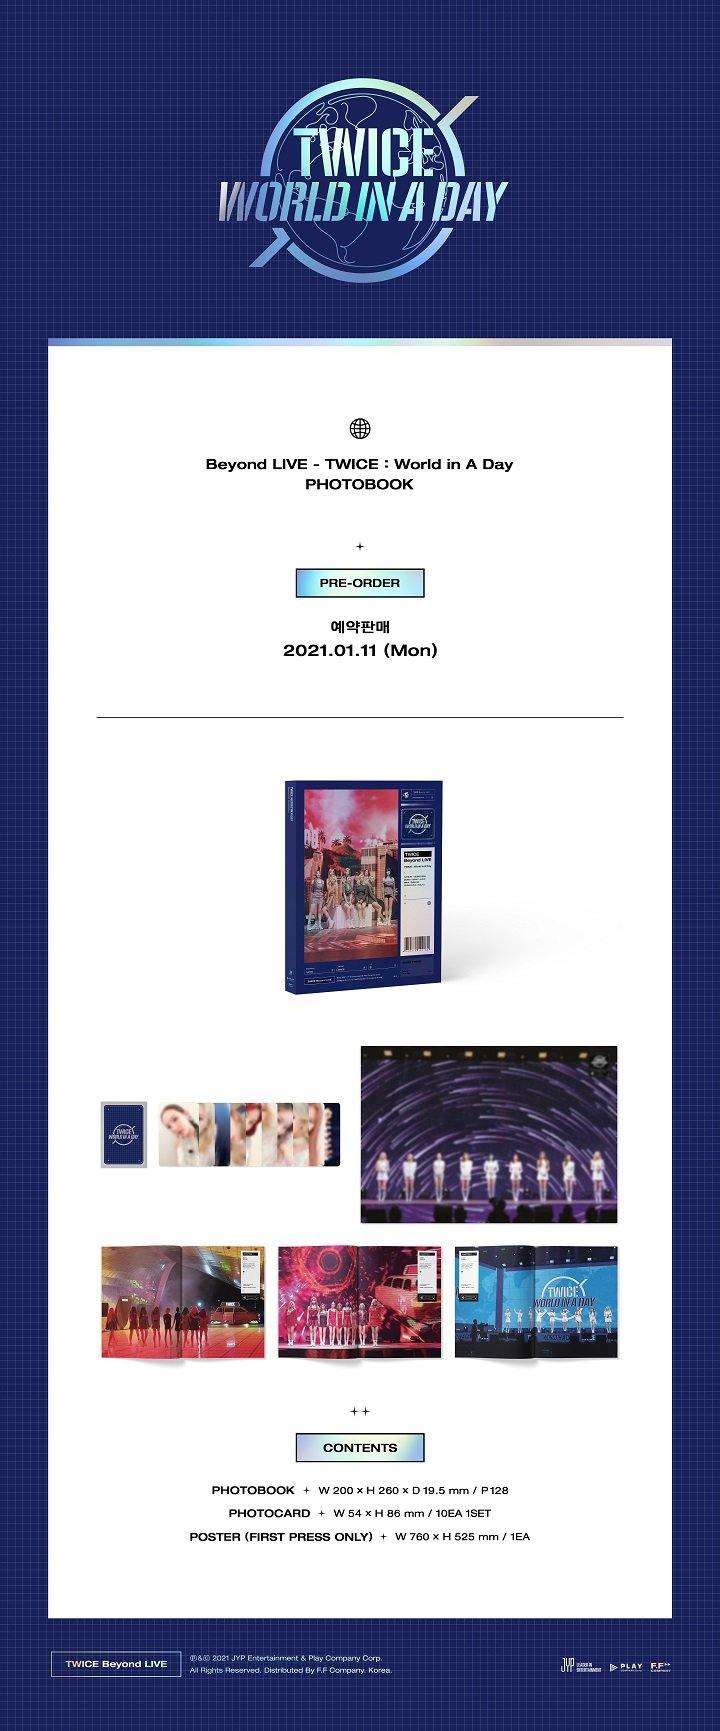 TWICE - BEYOND LIVE / TWICE : WORLD IN A DAY - PHOTOBOOK - J-Store Online